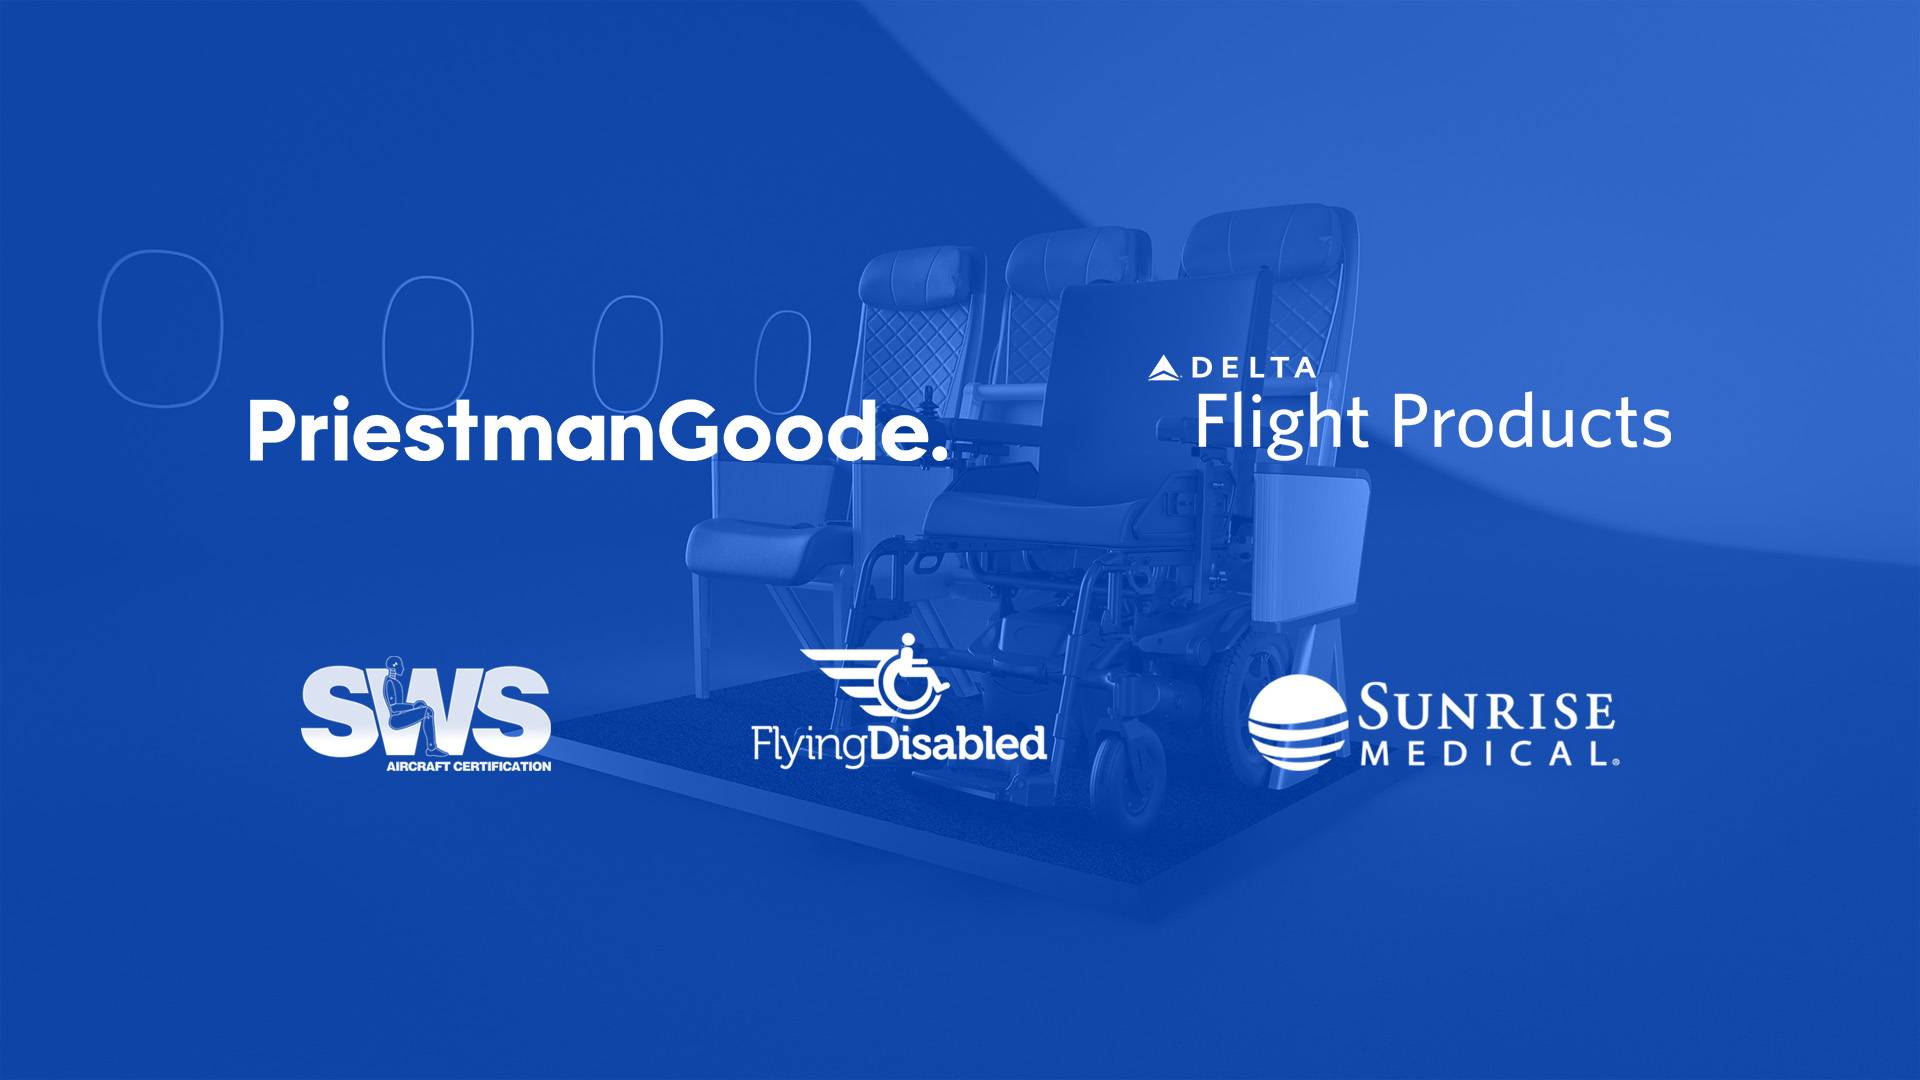 Air for all consortium logos. PriestmanGoode, Delta Flight Products, SWS aircraft certification, Flying Disabled and Sunrise Medical